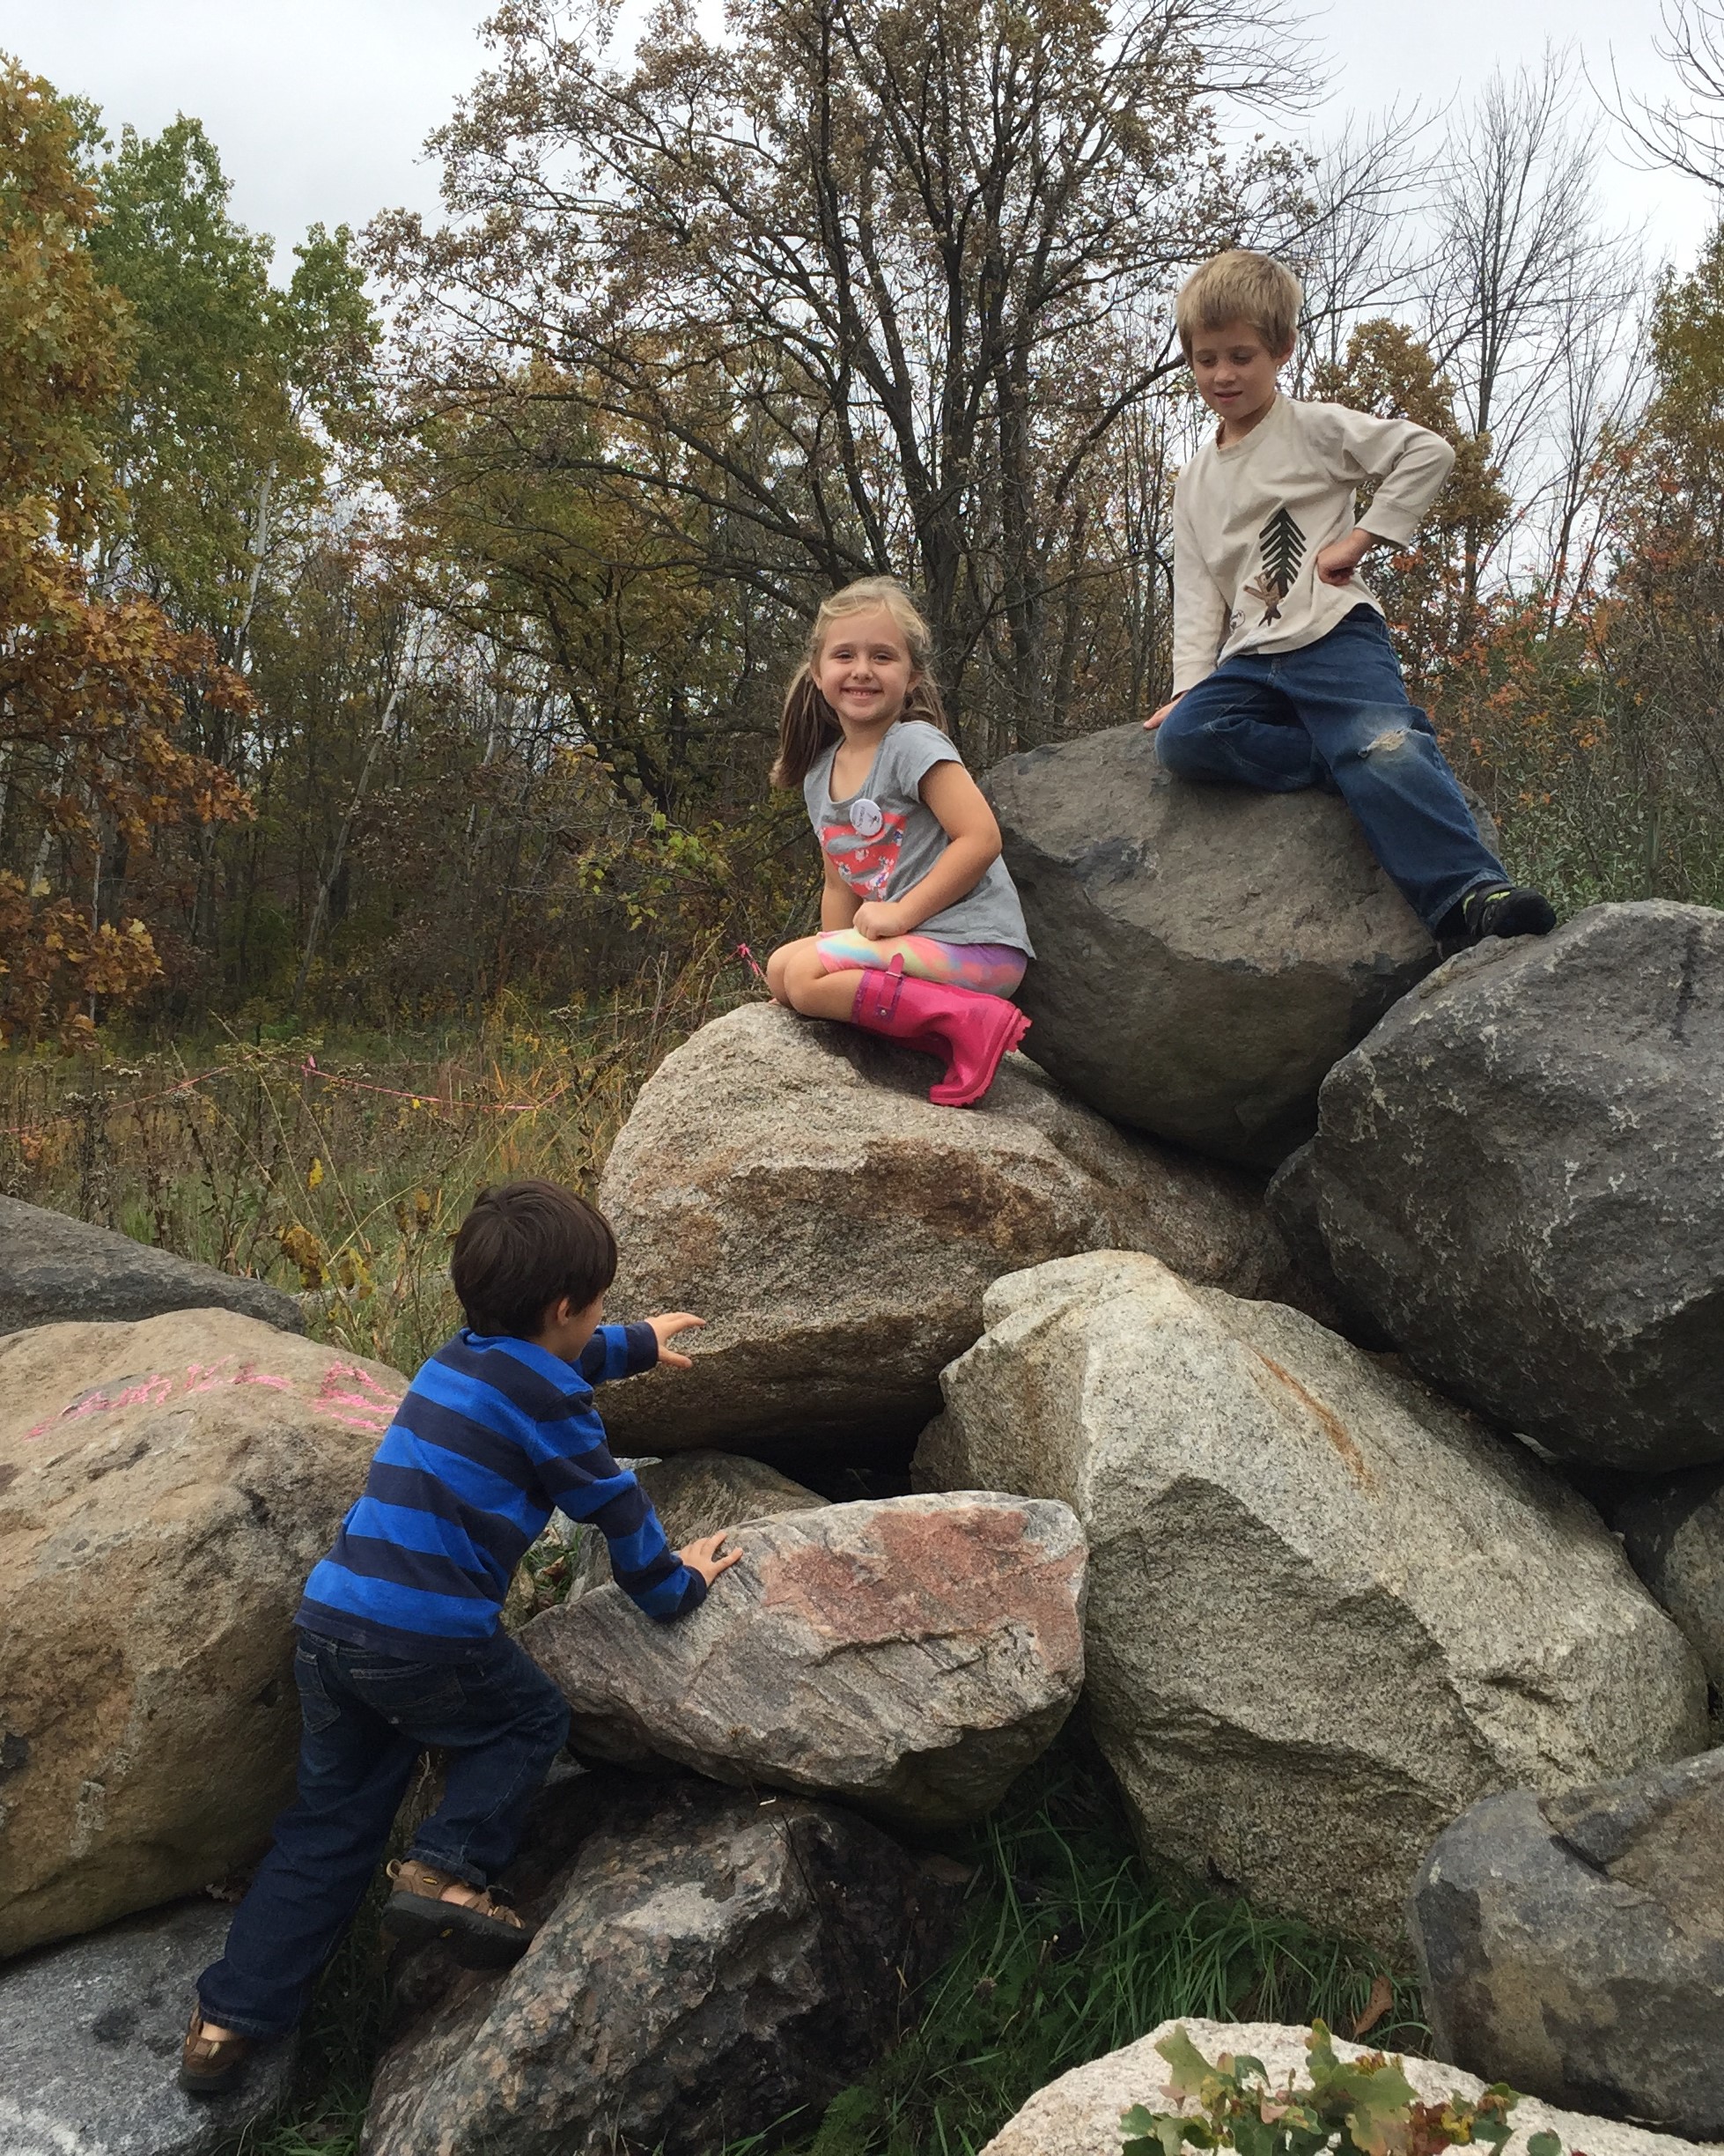 3 young kids are climbing on the Larsen Climbing Rocks at Riveredge. One of them is smiling at the camera